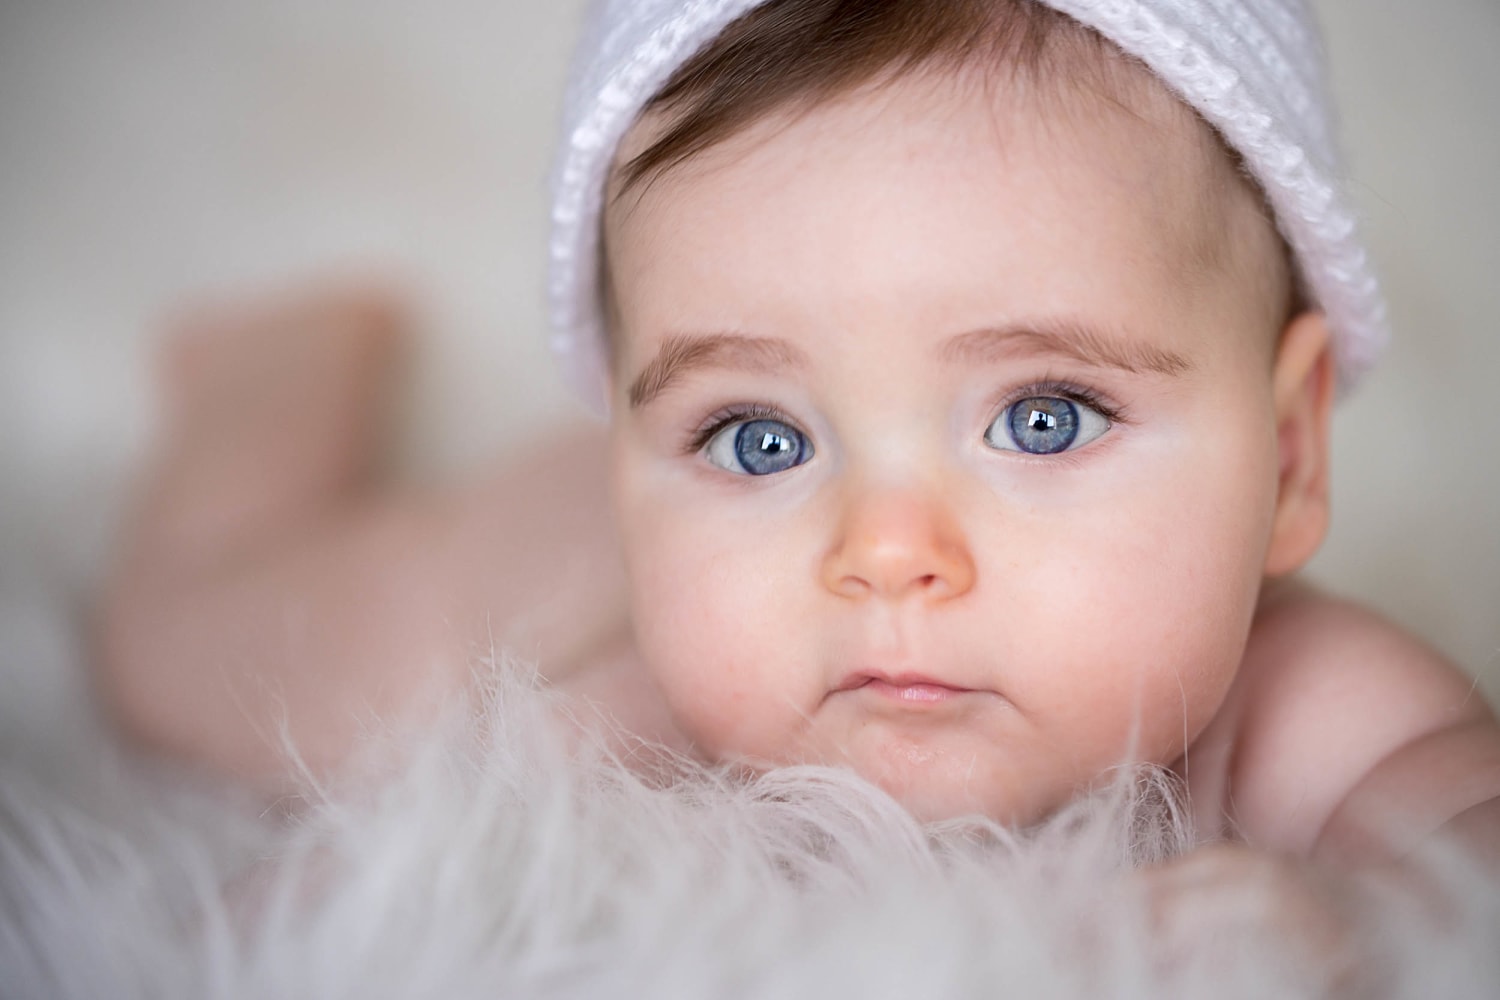 244 Scottish baby names: Is your favorite on the list?